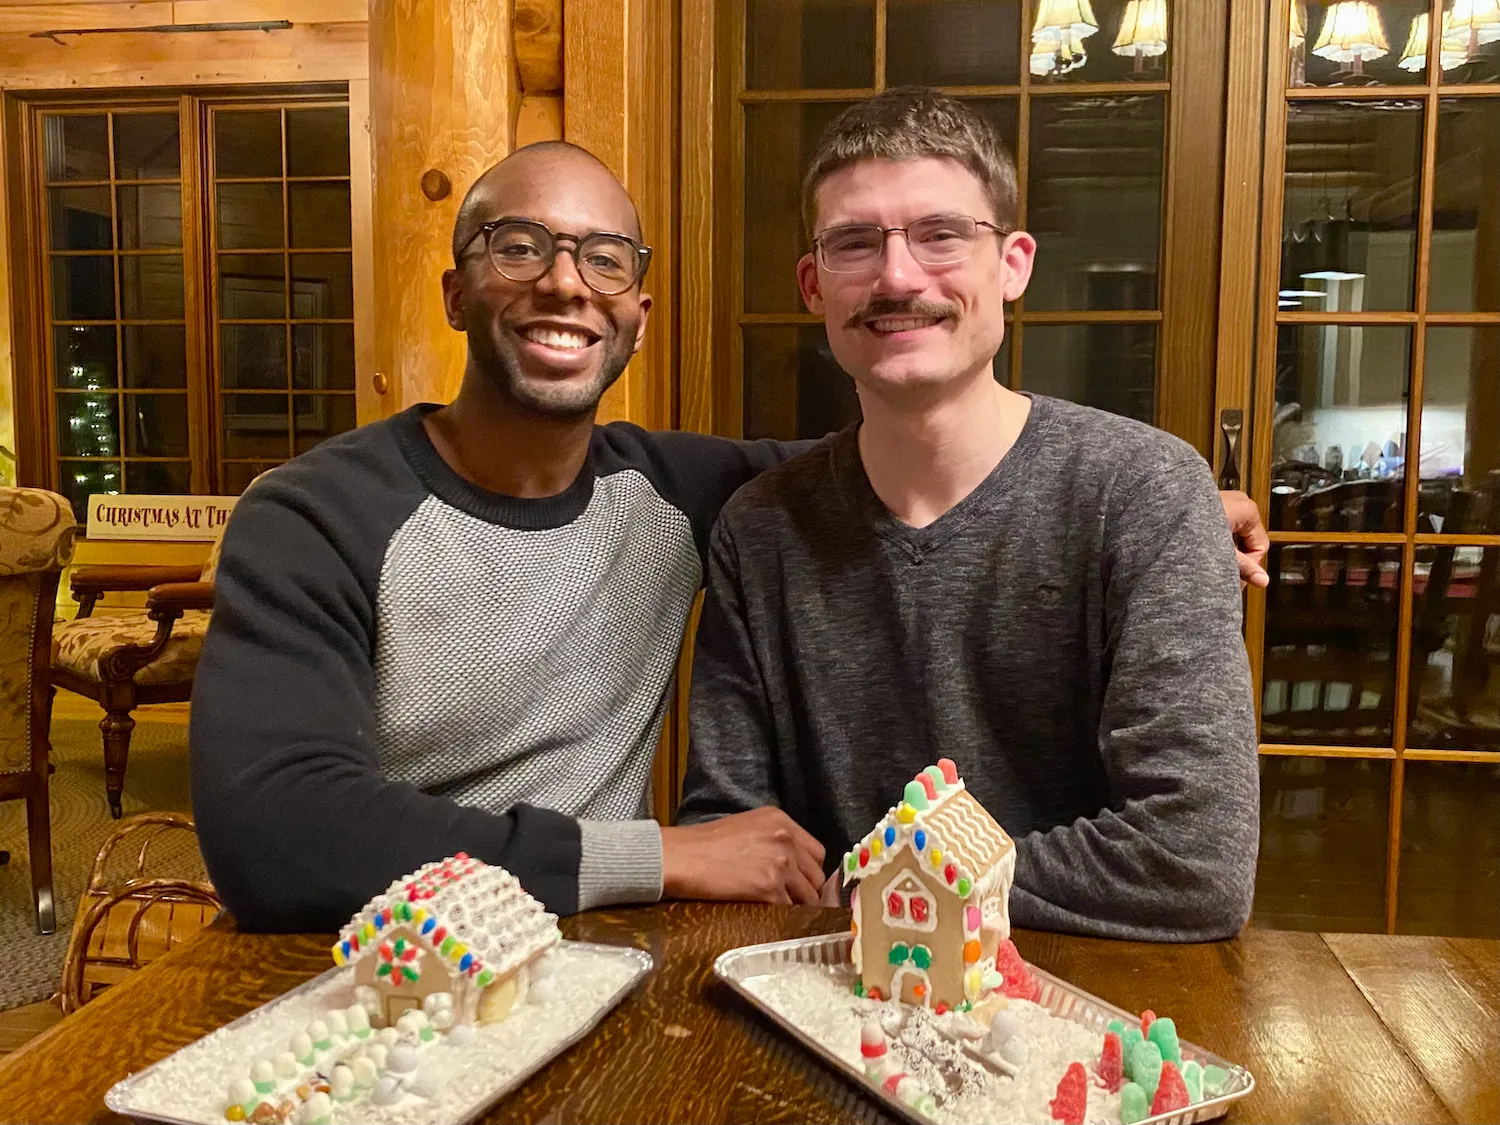 Picture of myself with my husband posing behind our gingerbread houses at Christmas